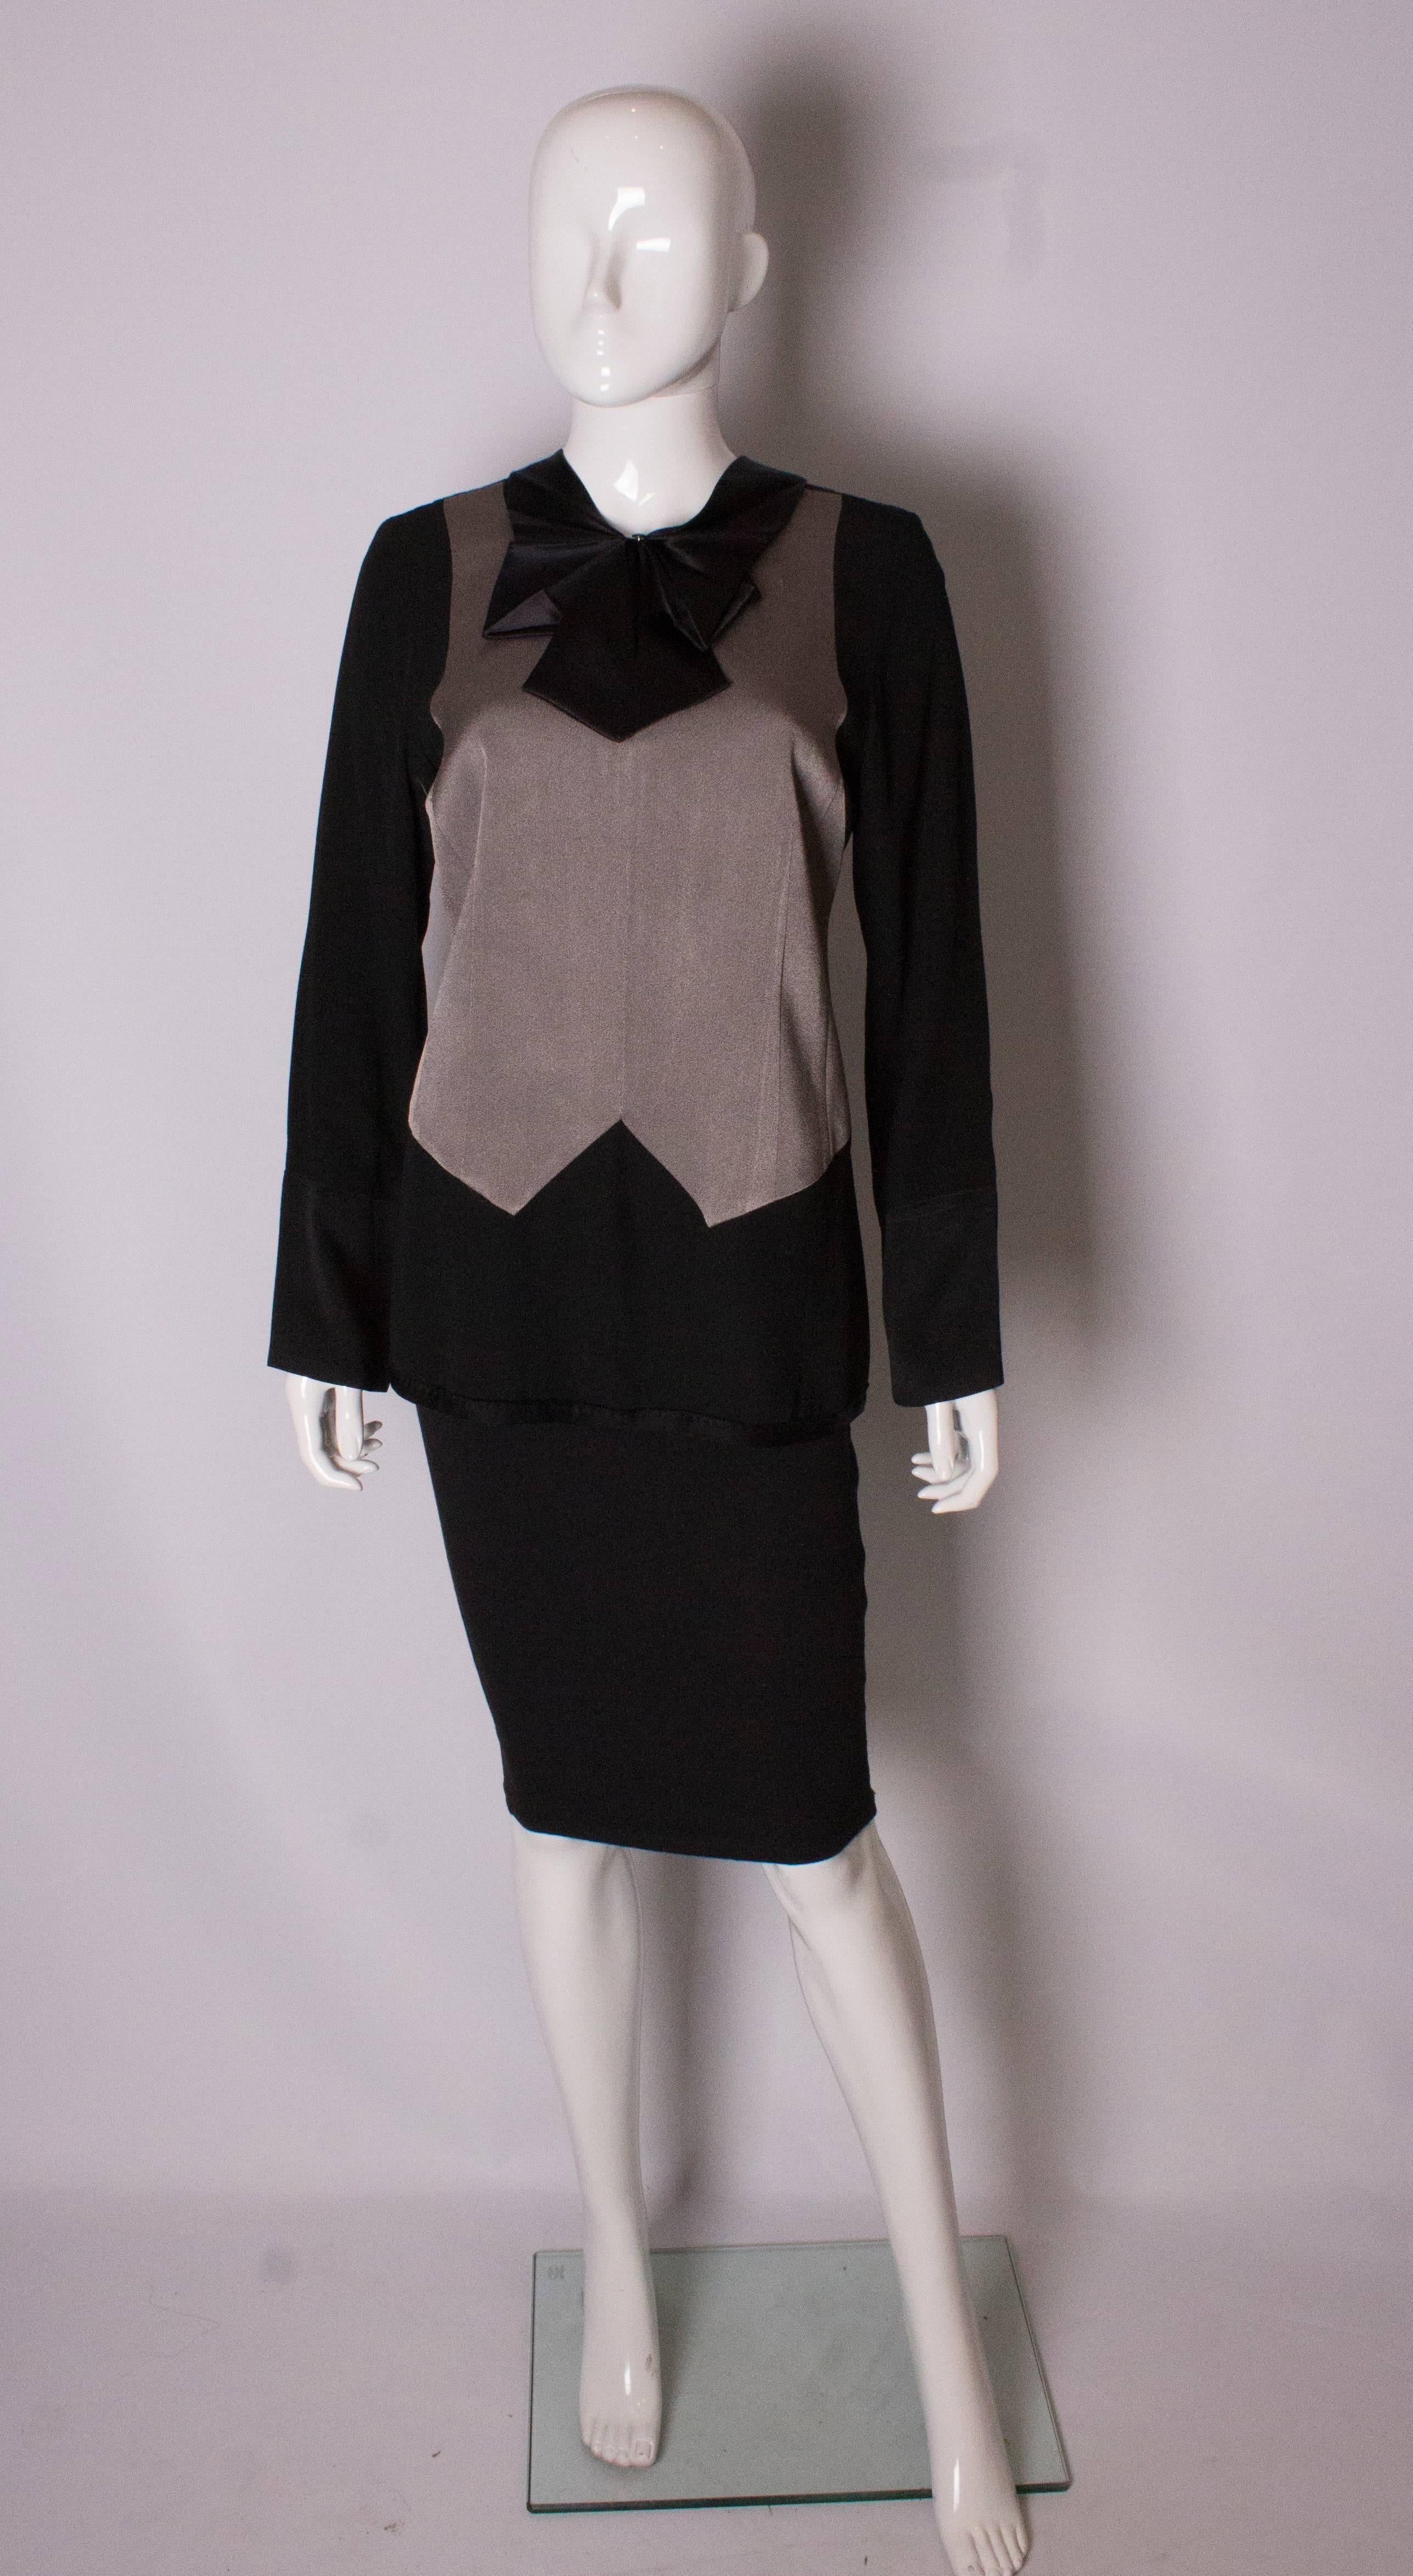 A chic evening top by Marc Jacobs. In grey and black, the top has a zip opening at the back, ribbon detail at the neck and hem and a satin bow at the front.